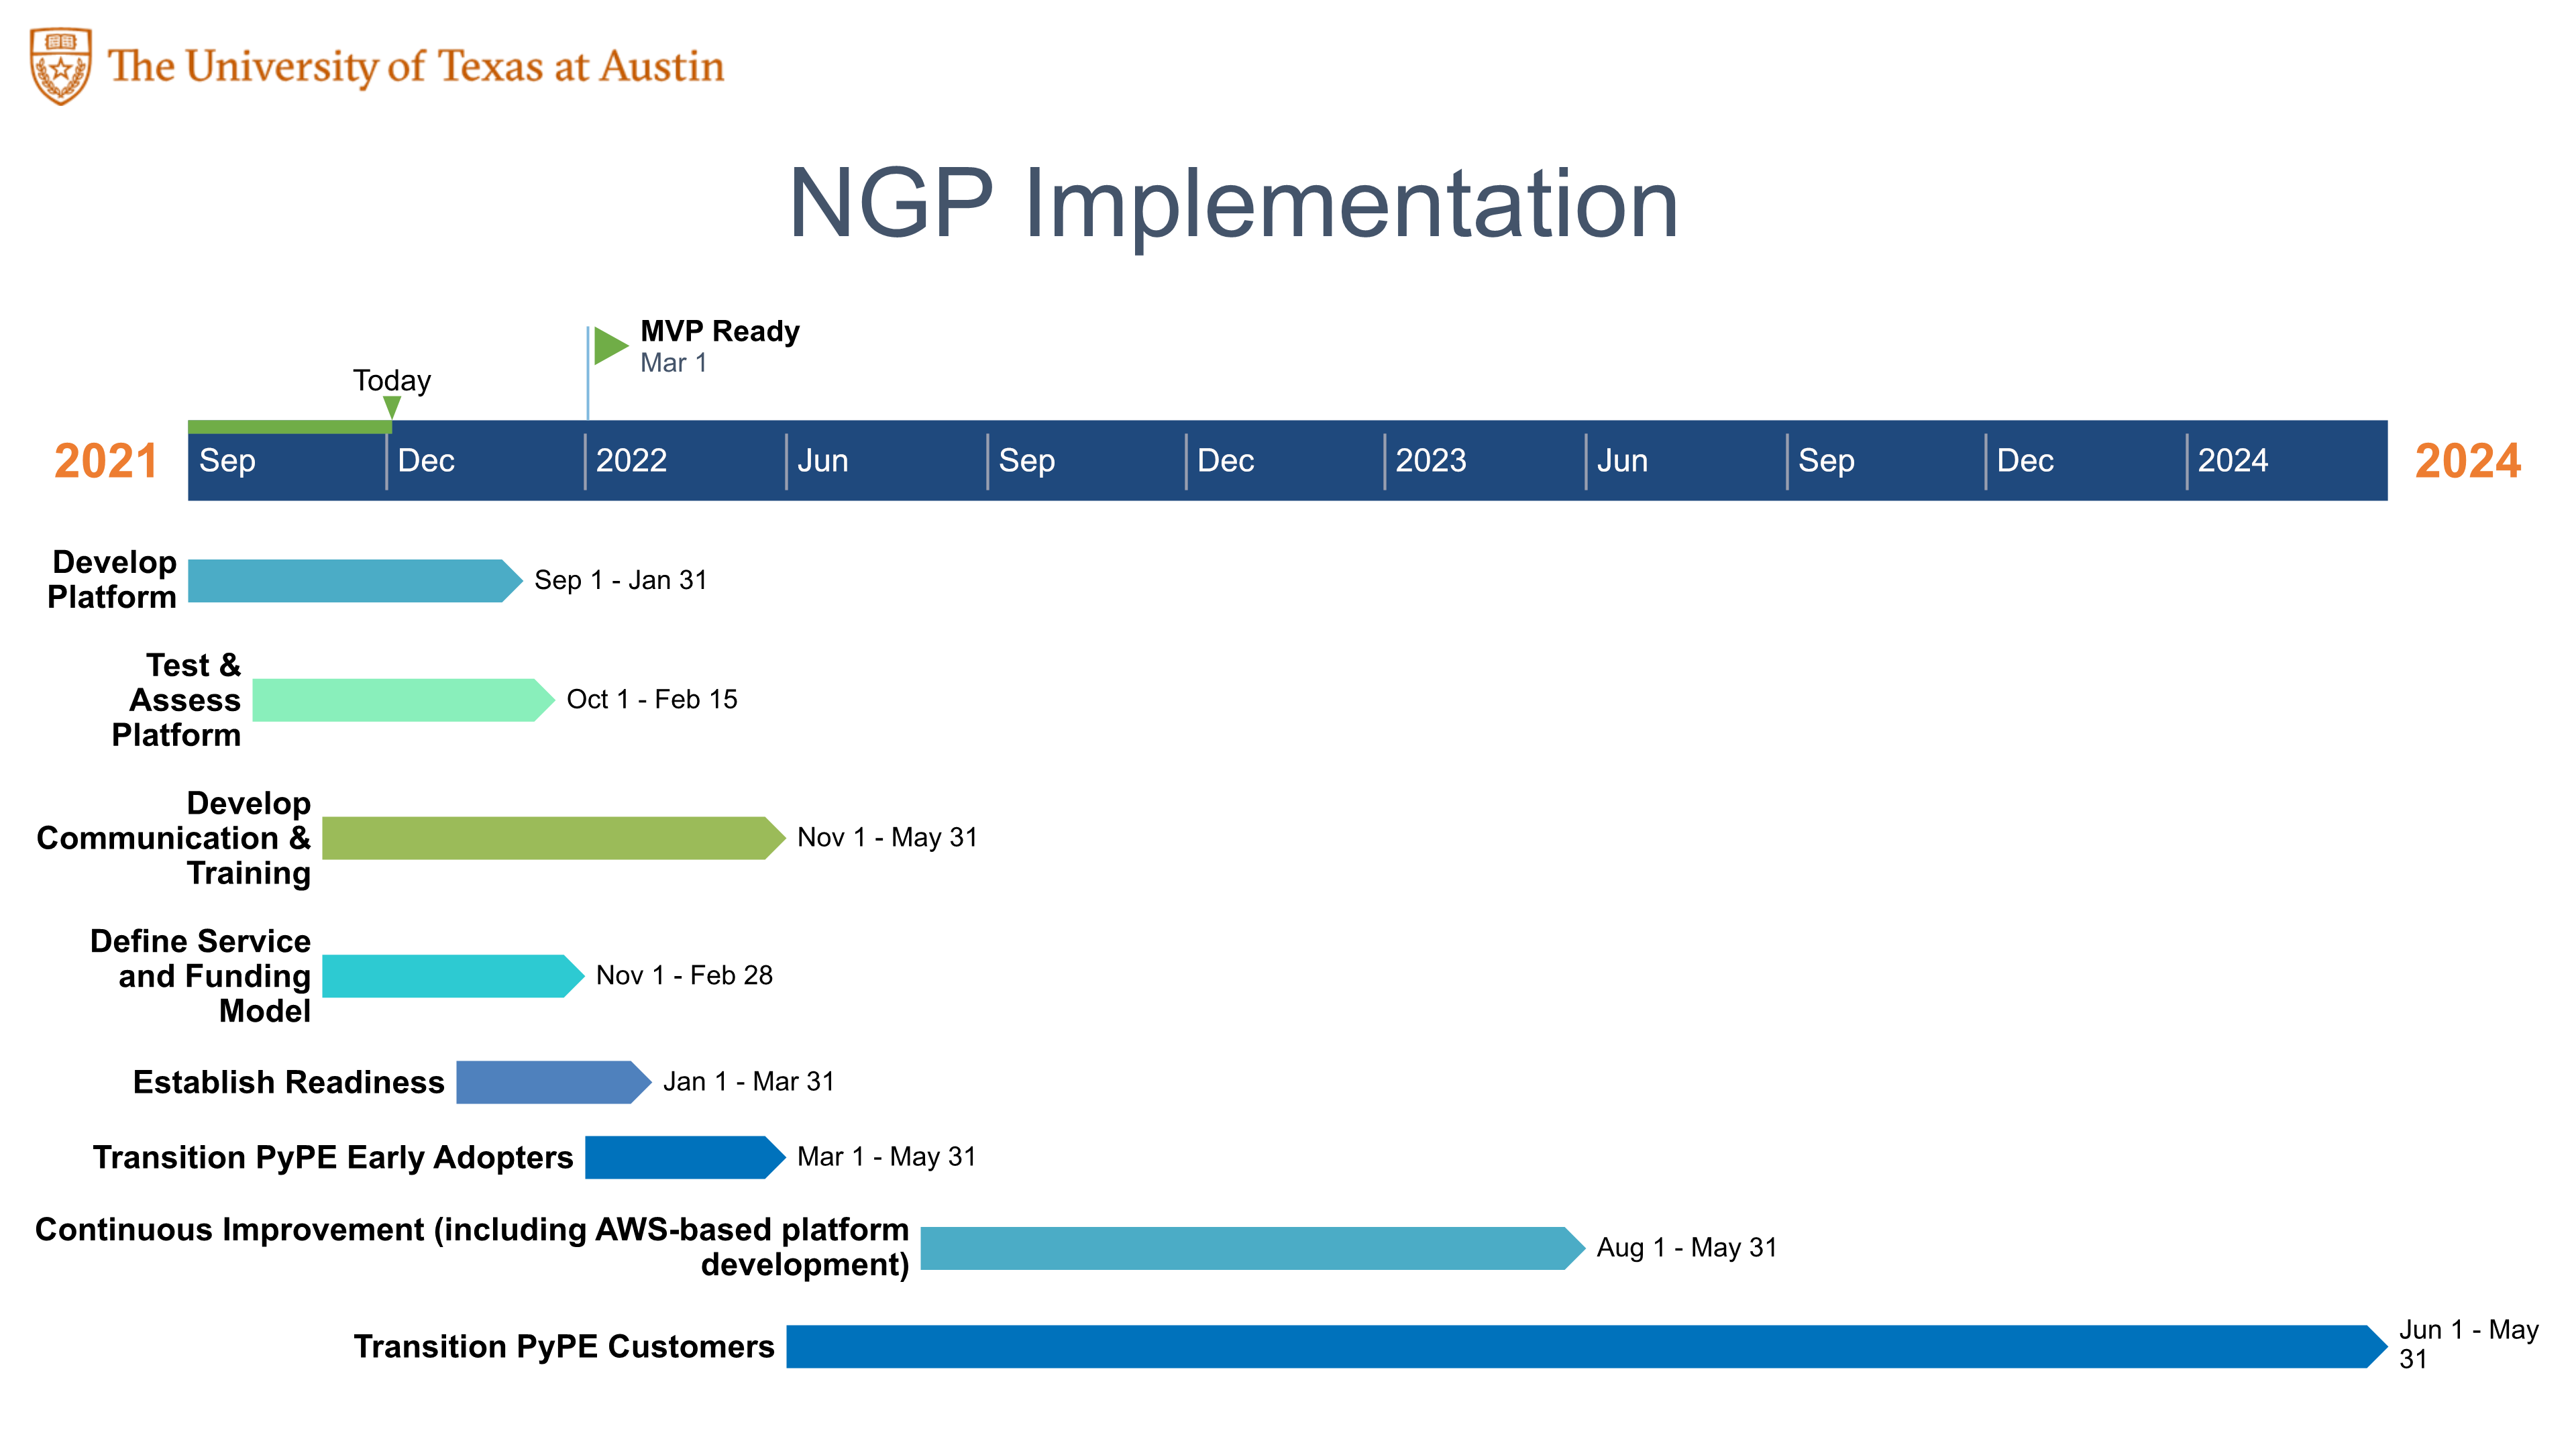 Timeline for NGP project